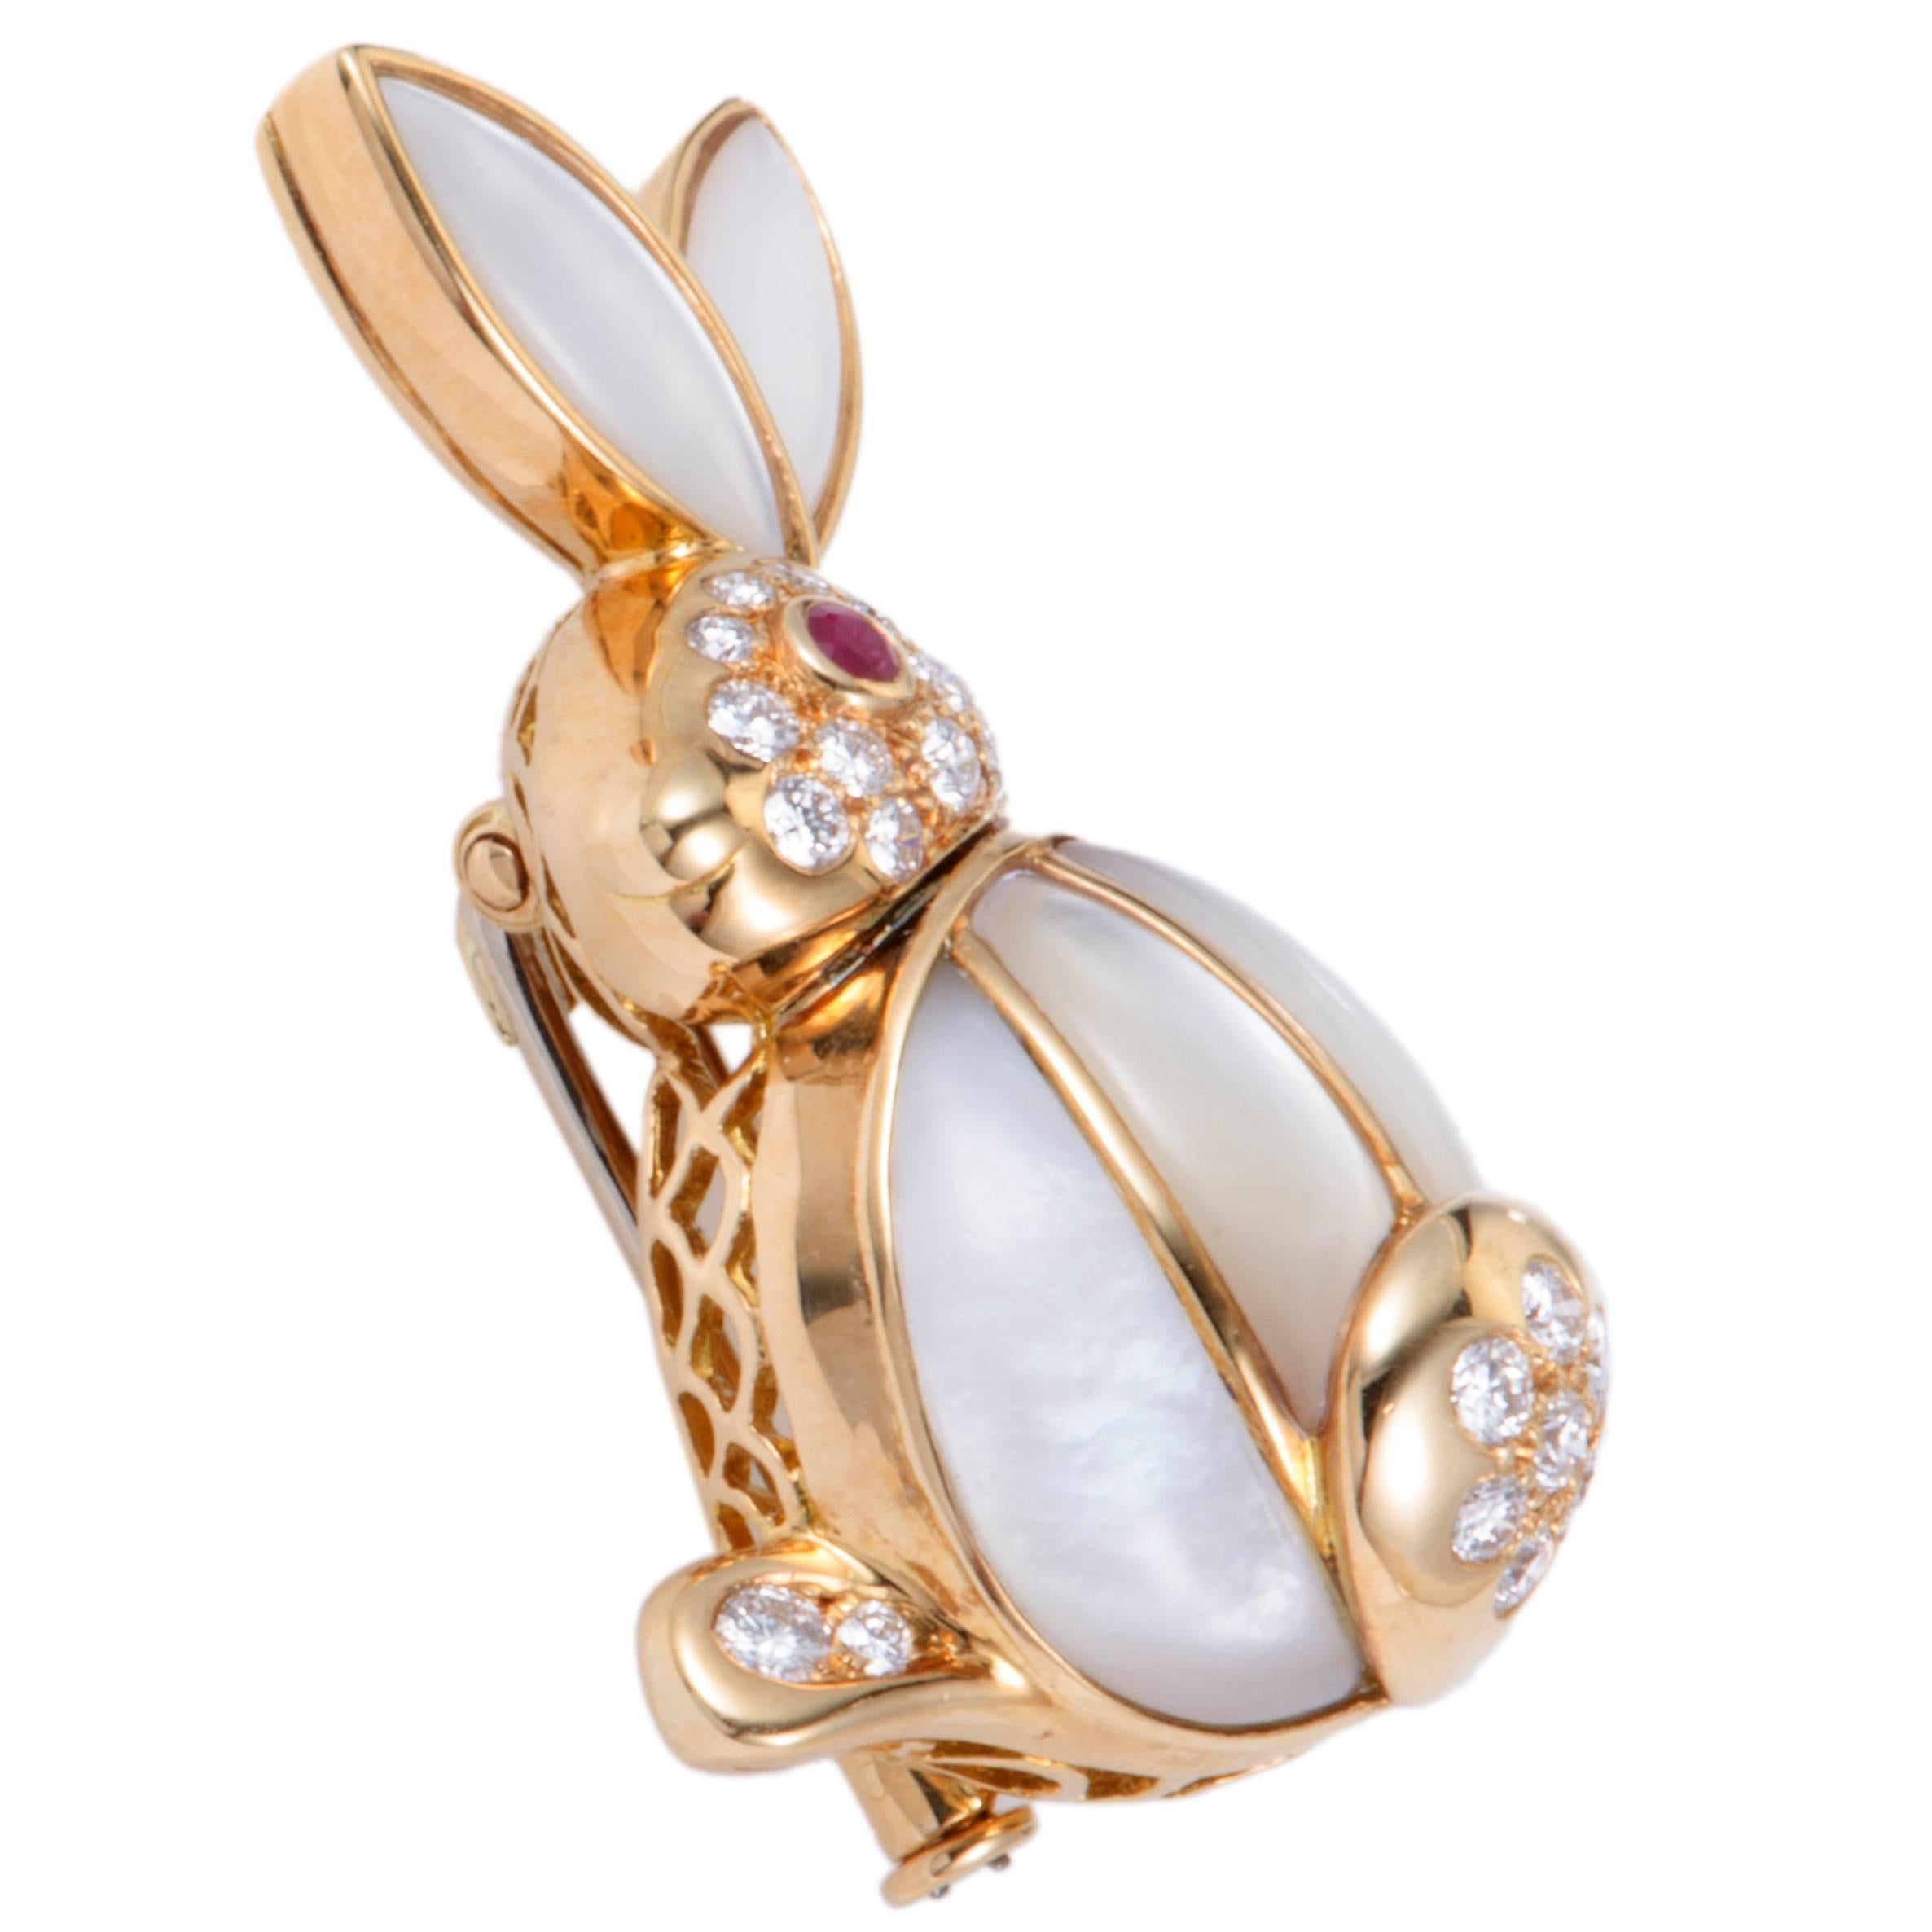 This remarkable brooch is one of Van Cleef & Arpels' brilliant designs. Its adorable rabbit-shaped design is crafted in shimmering 18K yellow gold, filled with the spectacular mother-of-pearl and embellished in 0.50ct of sparkling diamonds and a